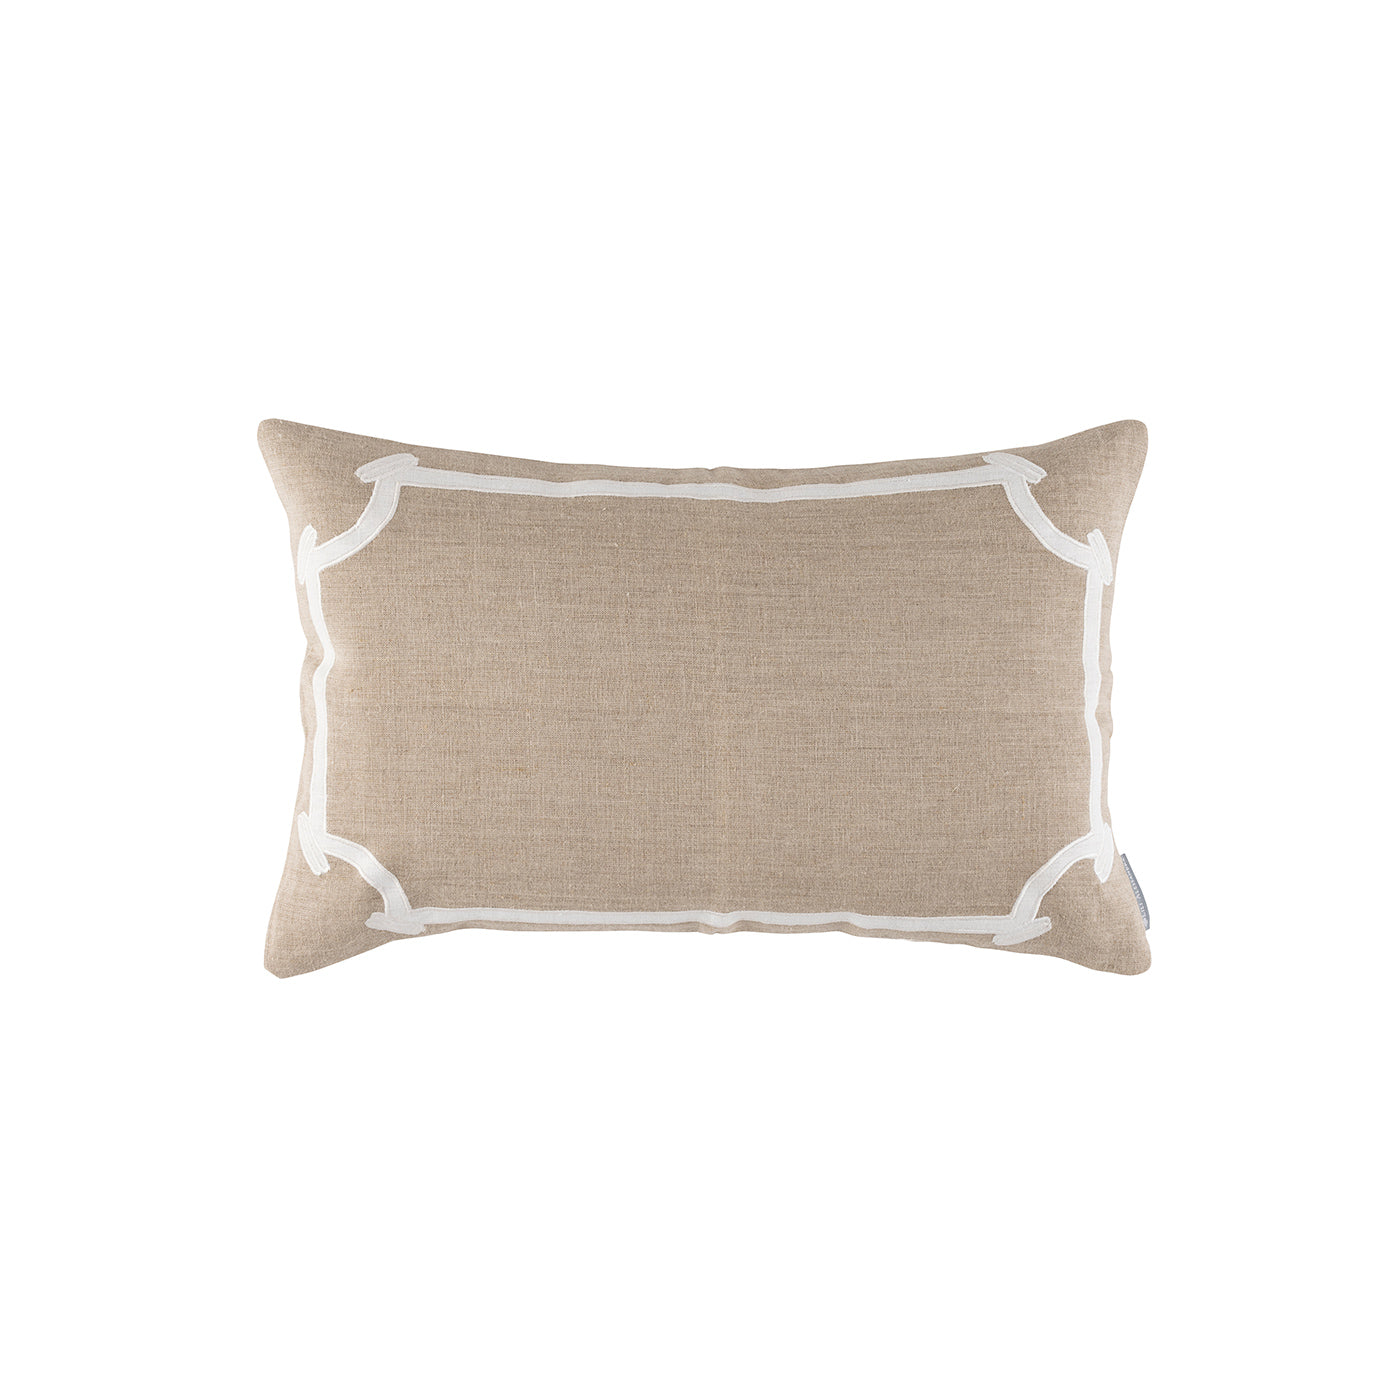 Annie Small Rectangle Pillow Natural Linen / White Linen Applique 14X22 (Insert Included) Final Sale